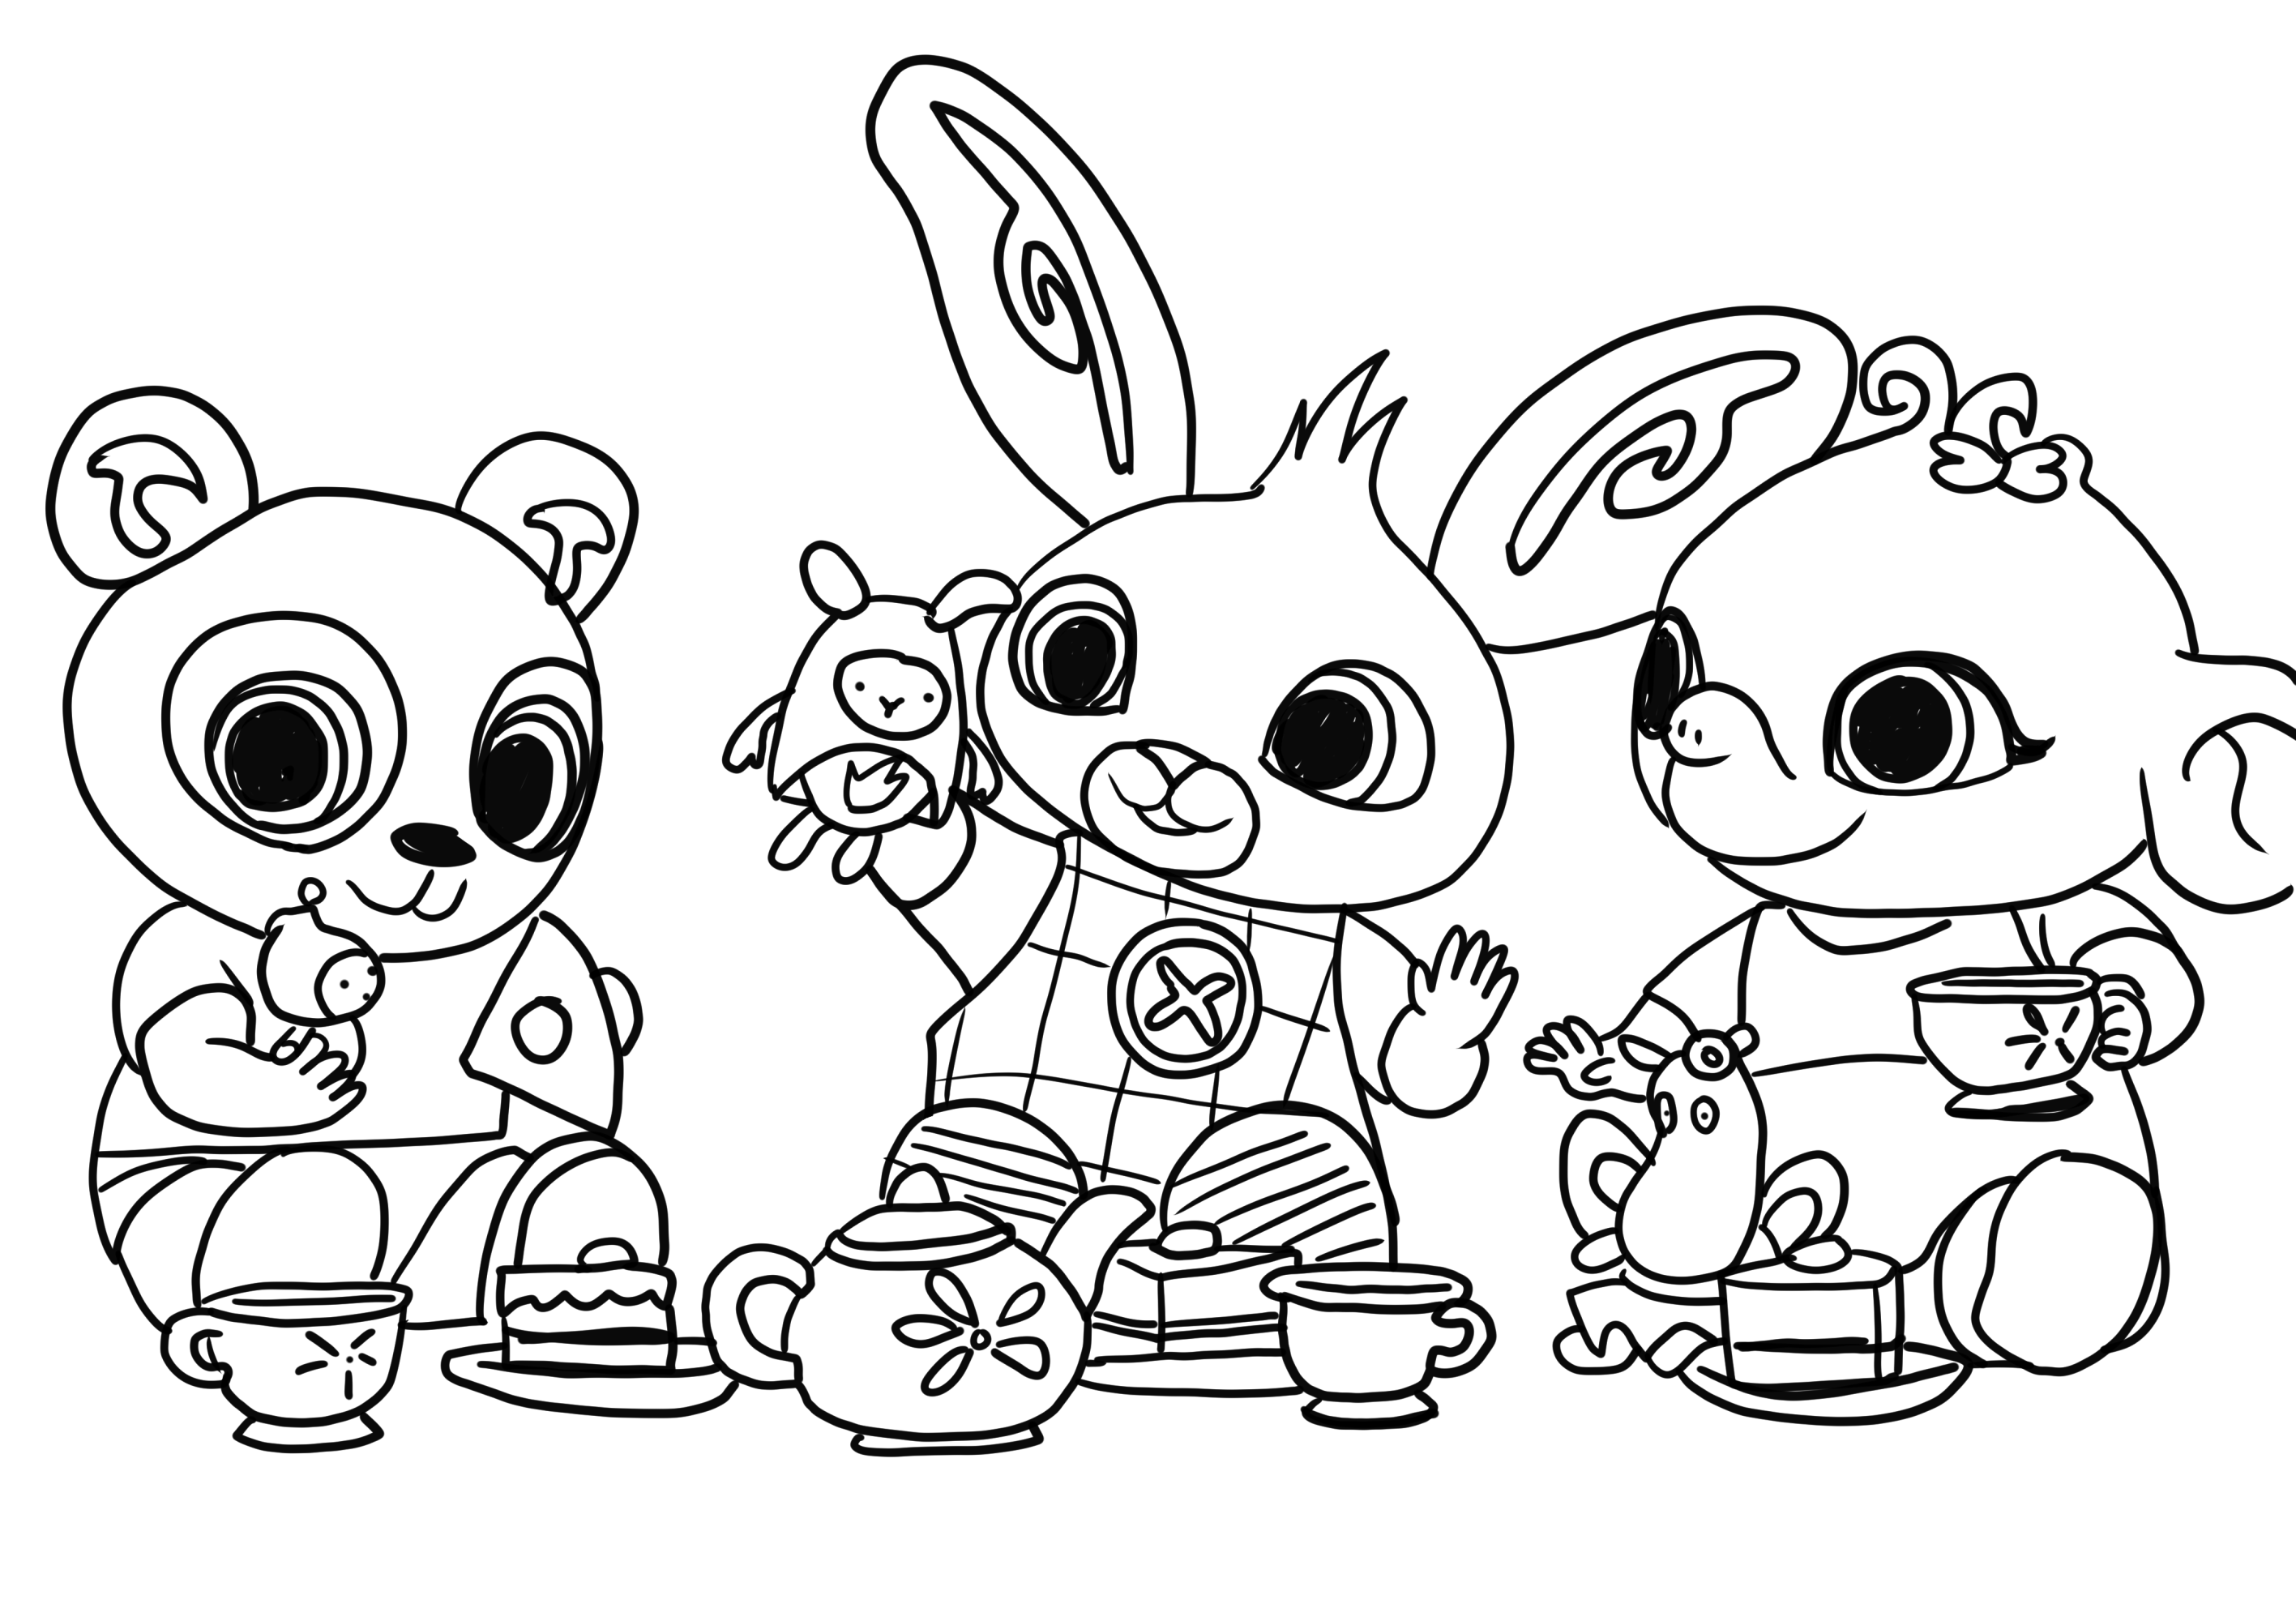 Bing, pando and Sula playing coloring page